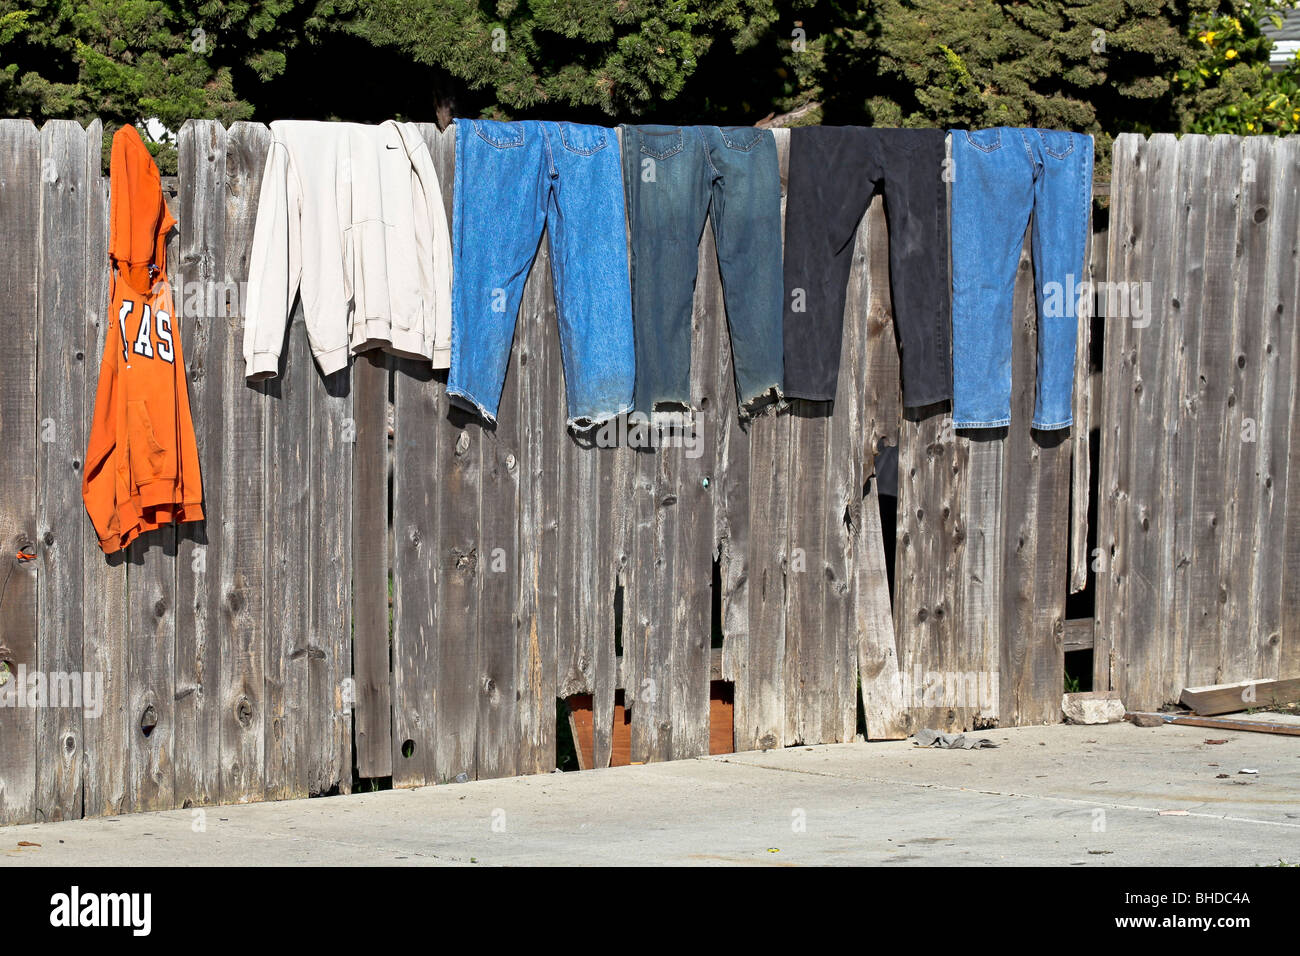 Clothes drying on a Fence Stock Photo